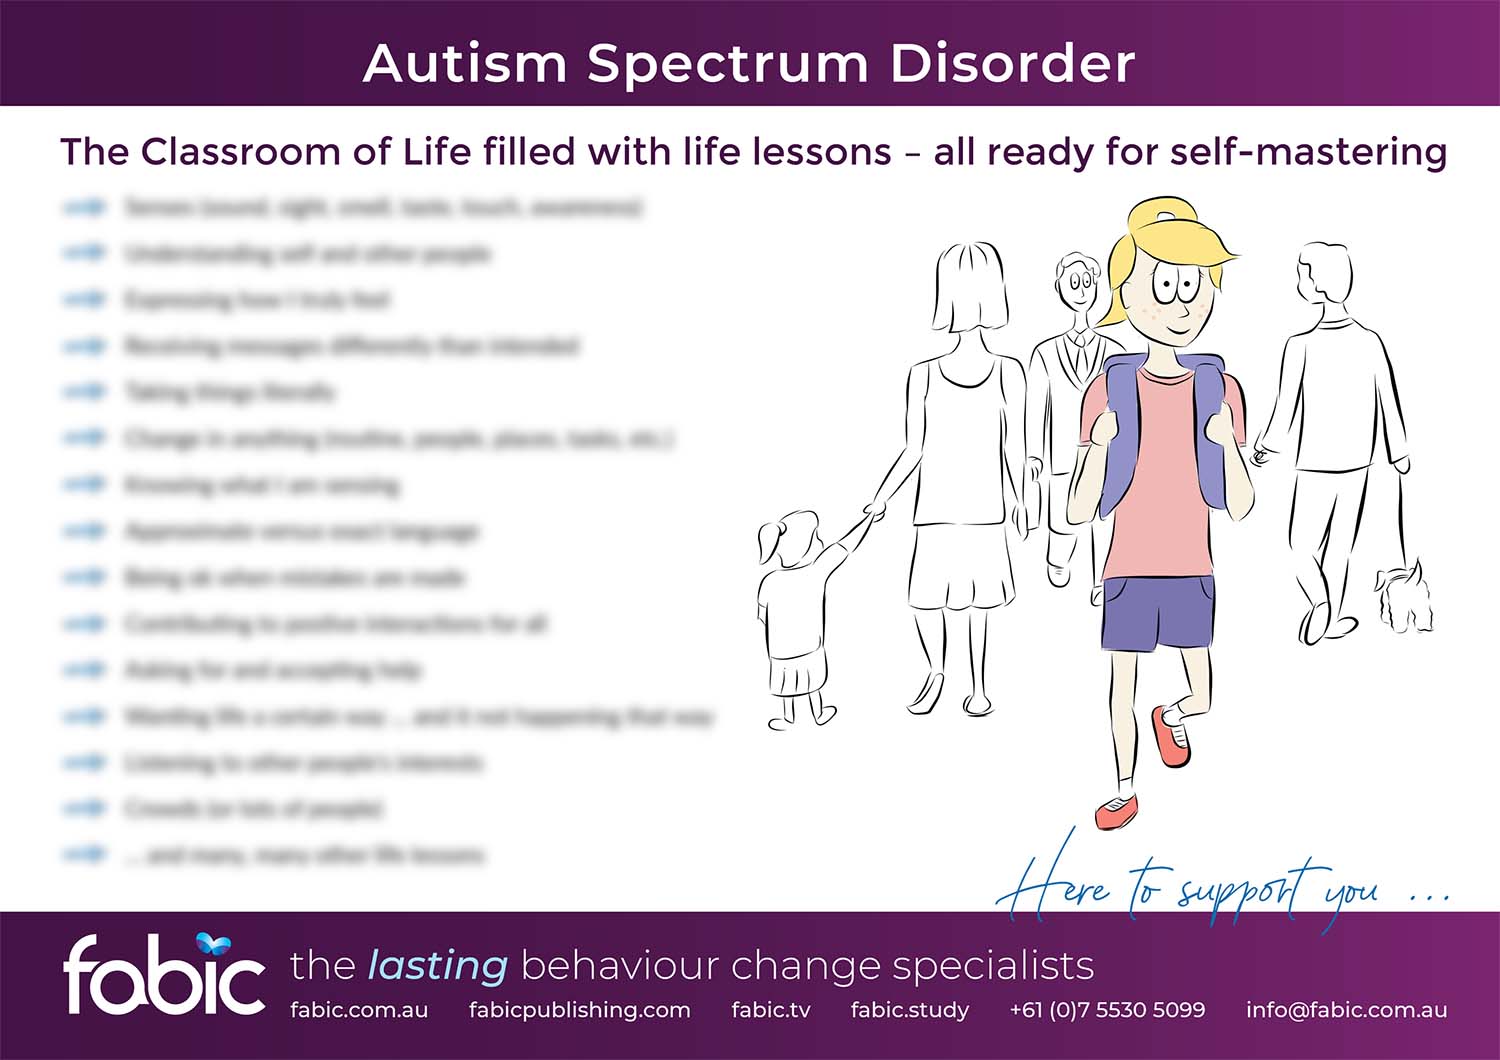 Fabic Autism Poster by Tanya Curtis